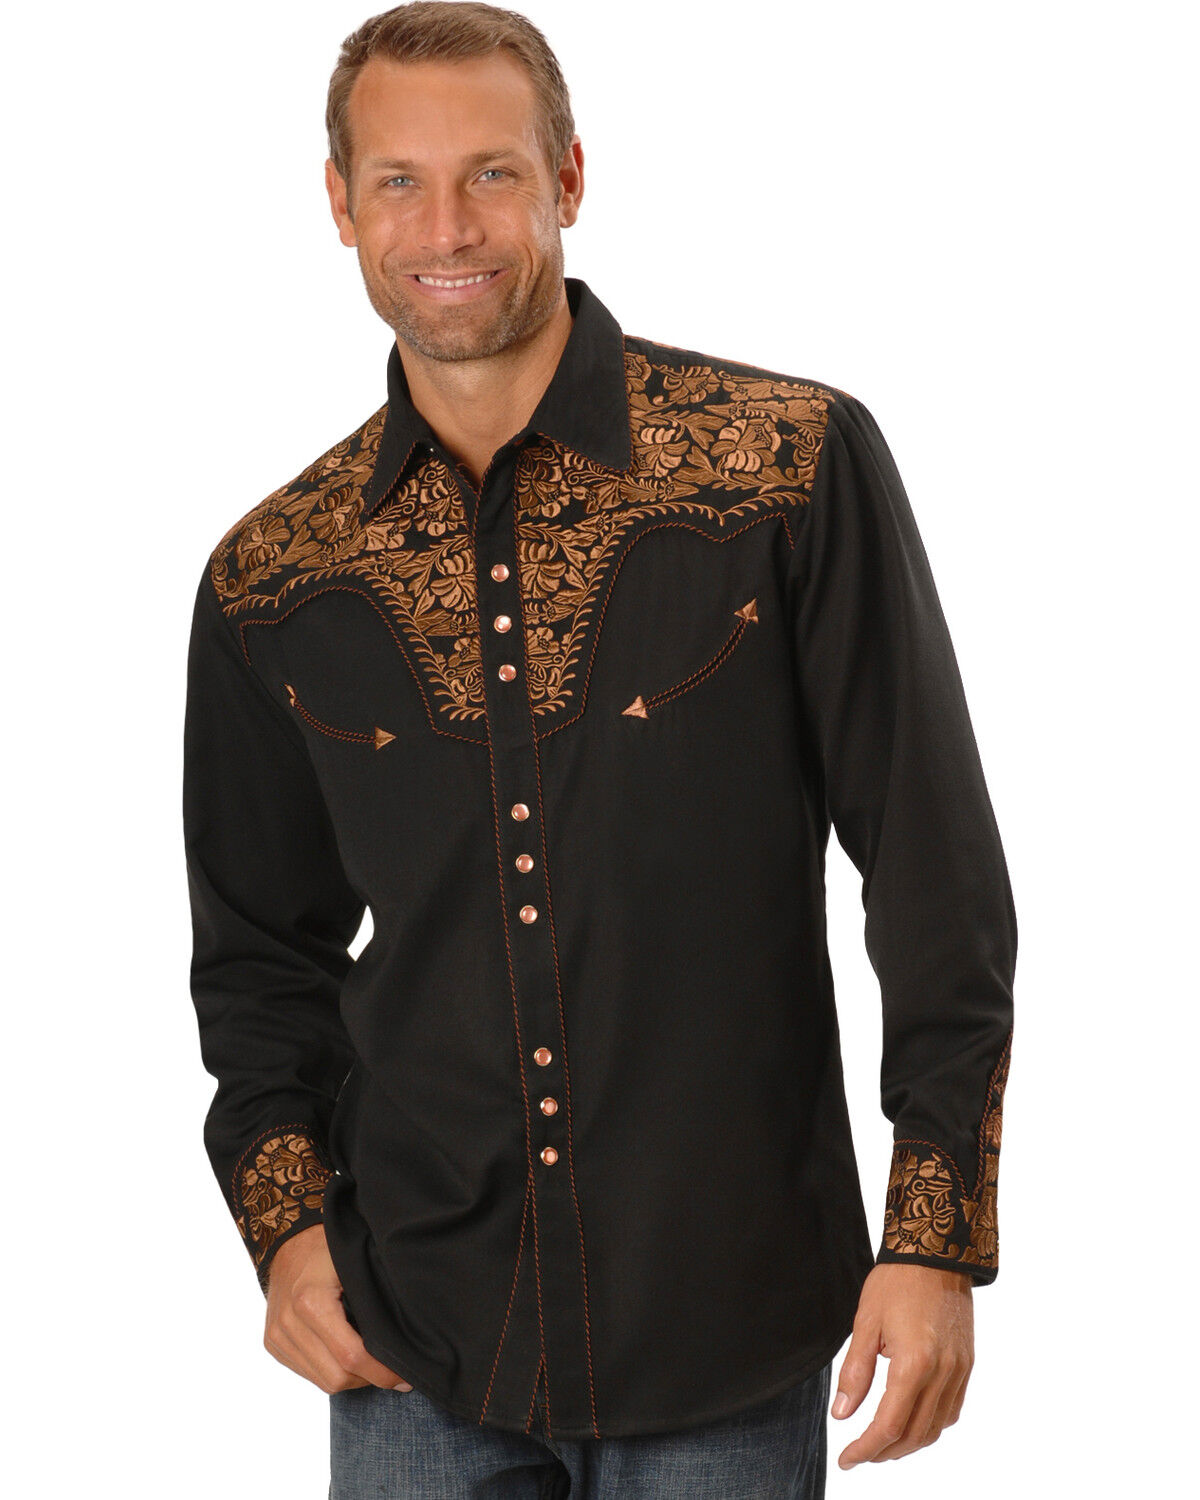 Men's Scully Shirts - Boot Barn